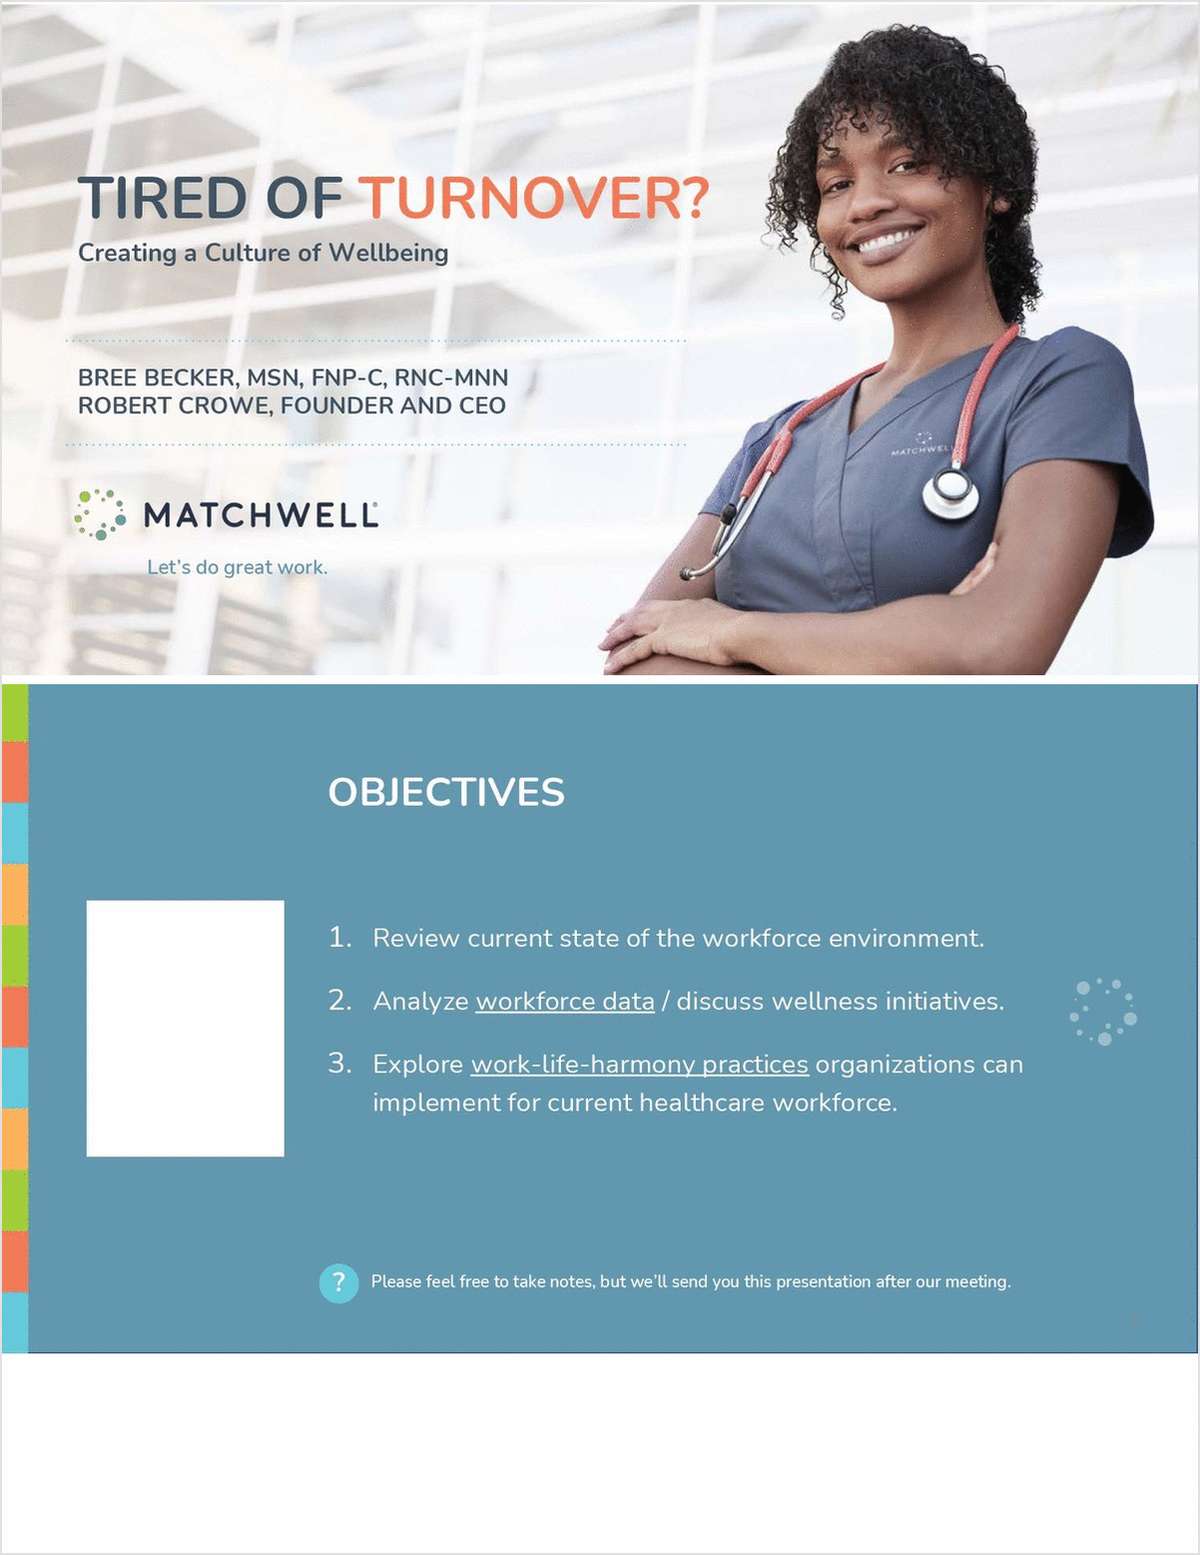 Tired of Turnover?